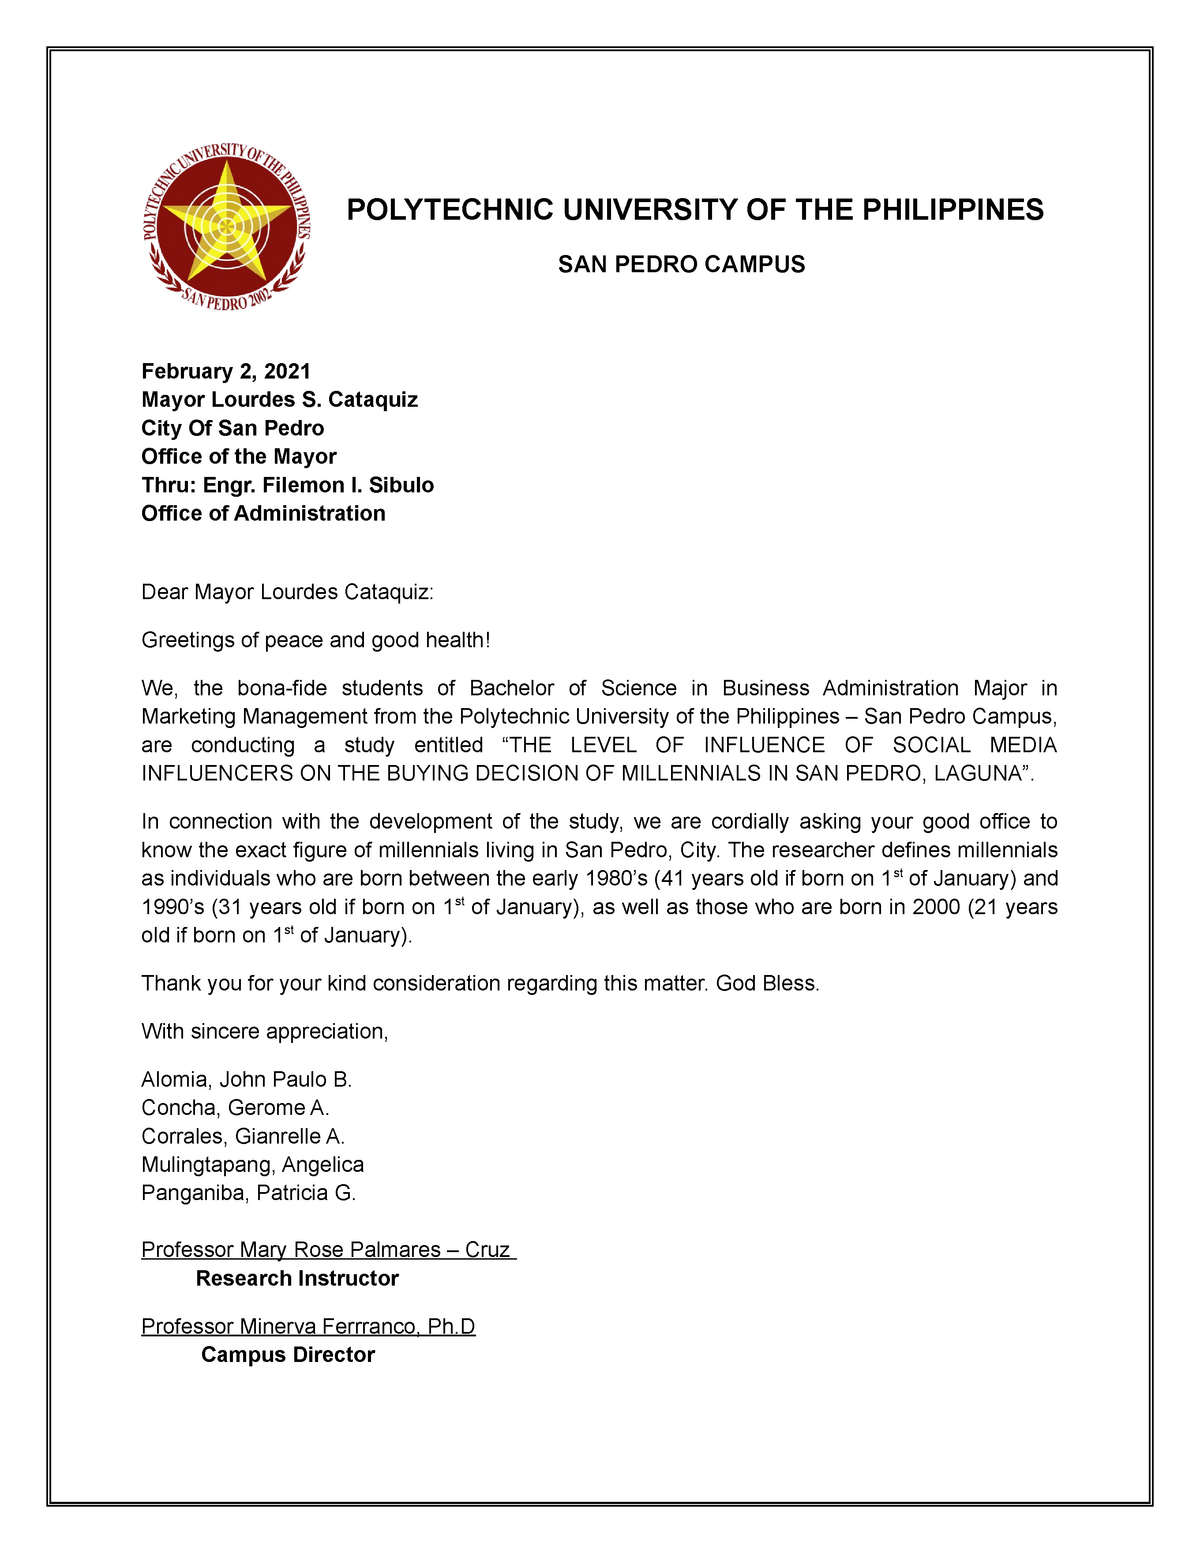 Request Letter Data Gathering Polytechnic University Of The Philippines San Pedro Campus